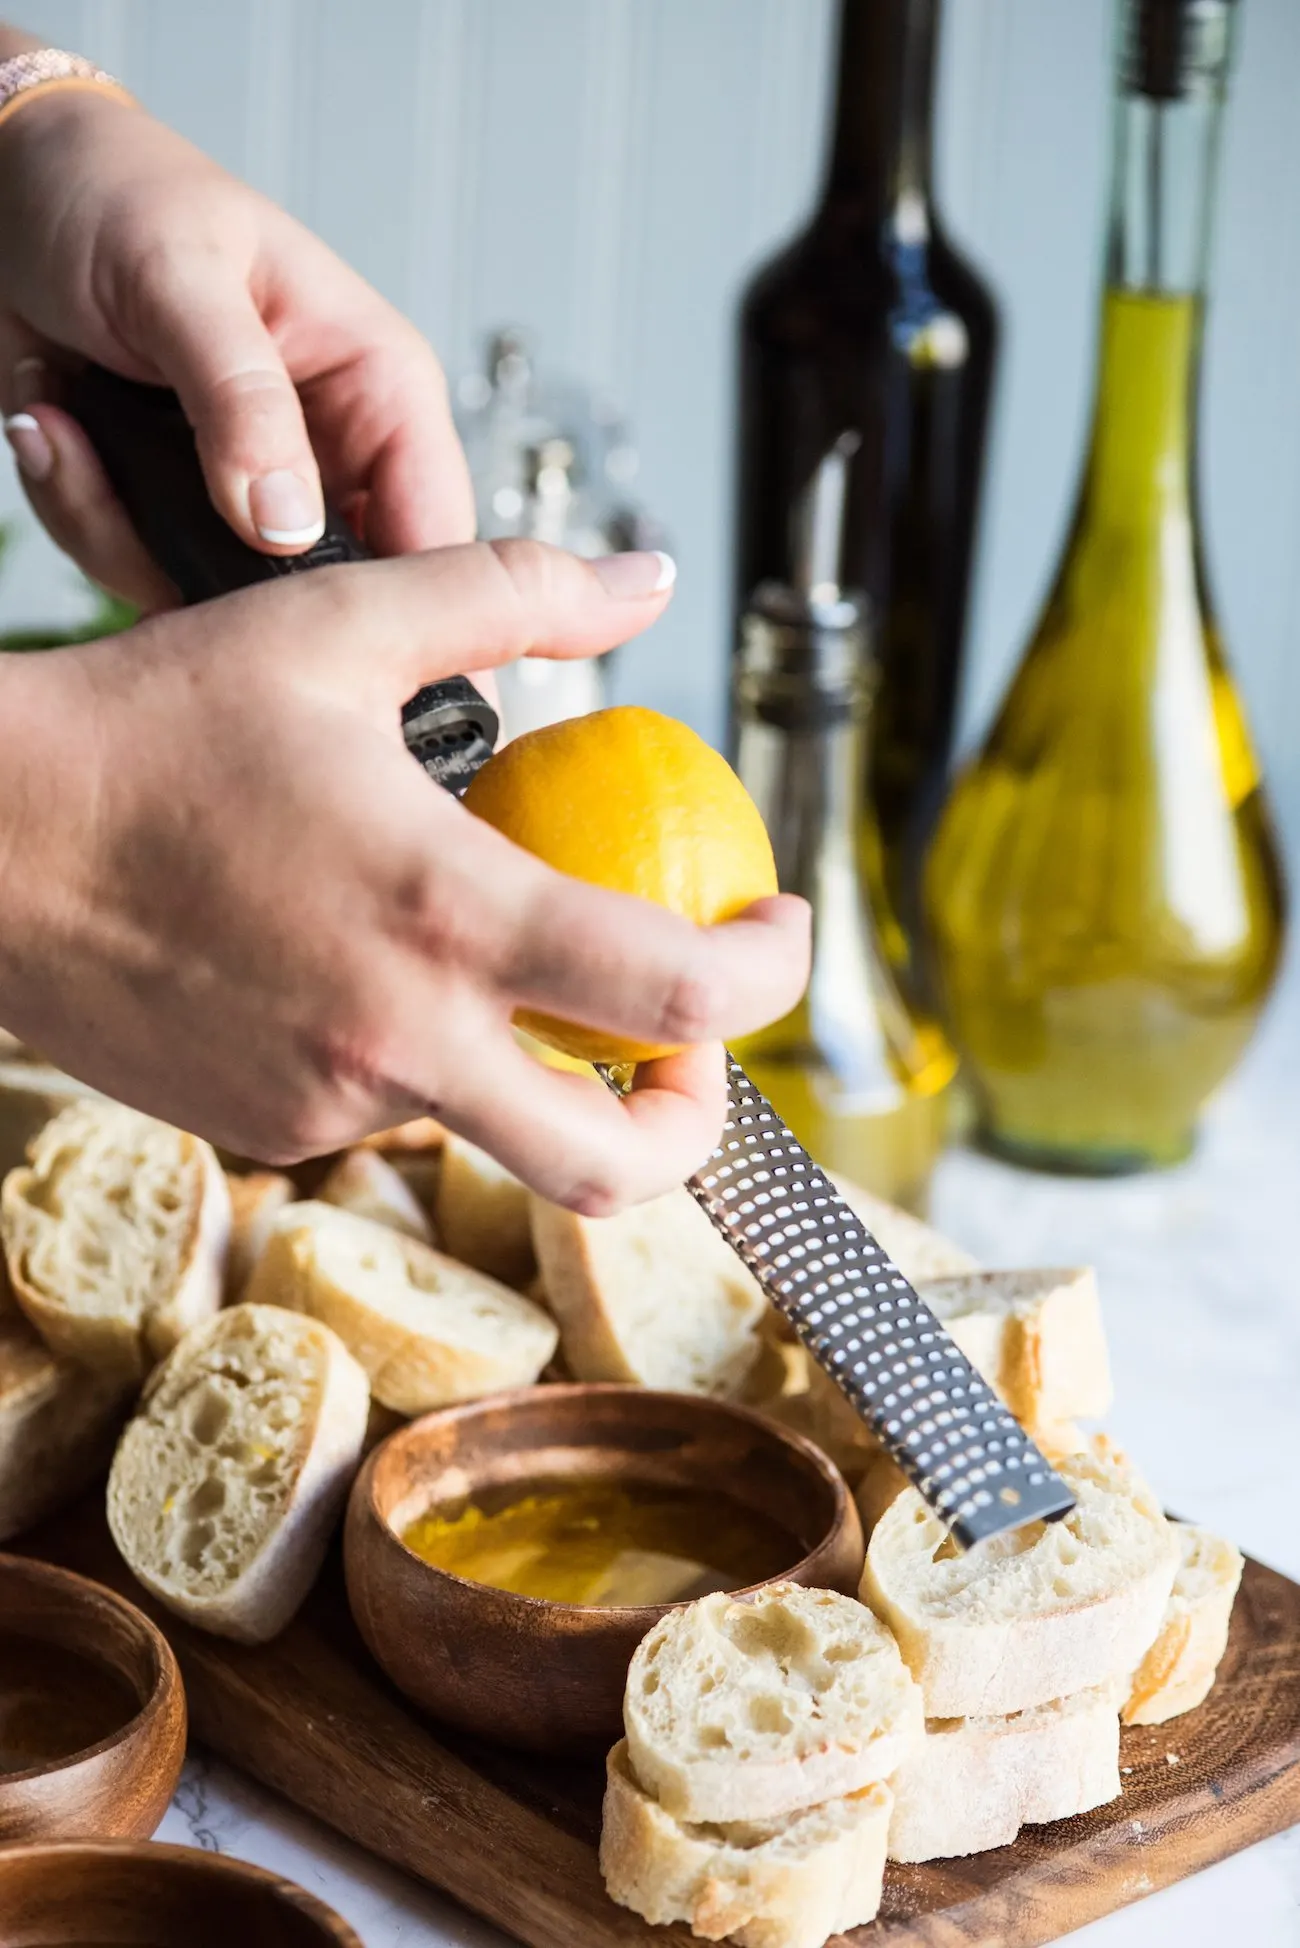 Bread and Olive Oil Appetizer Dipping Station | Party appetizers, entertaining tips, party ideas, holiday entertaining tips and more from @cydconverse